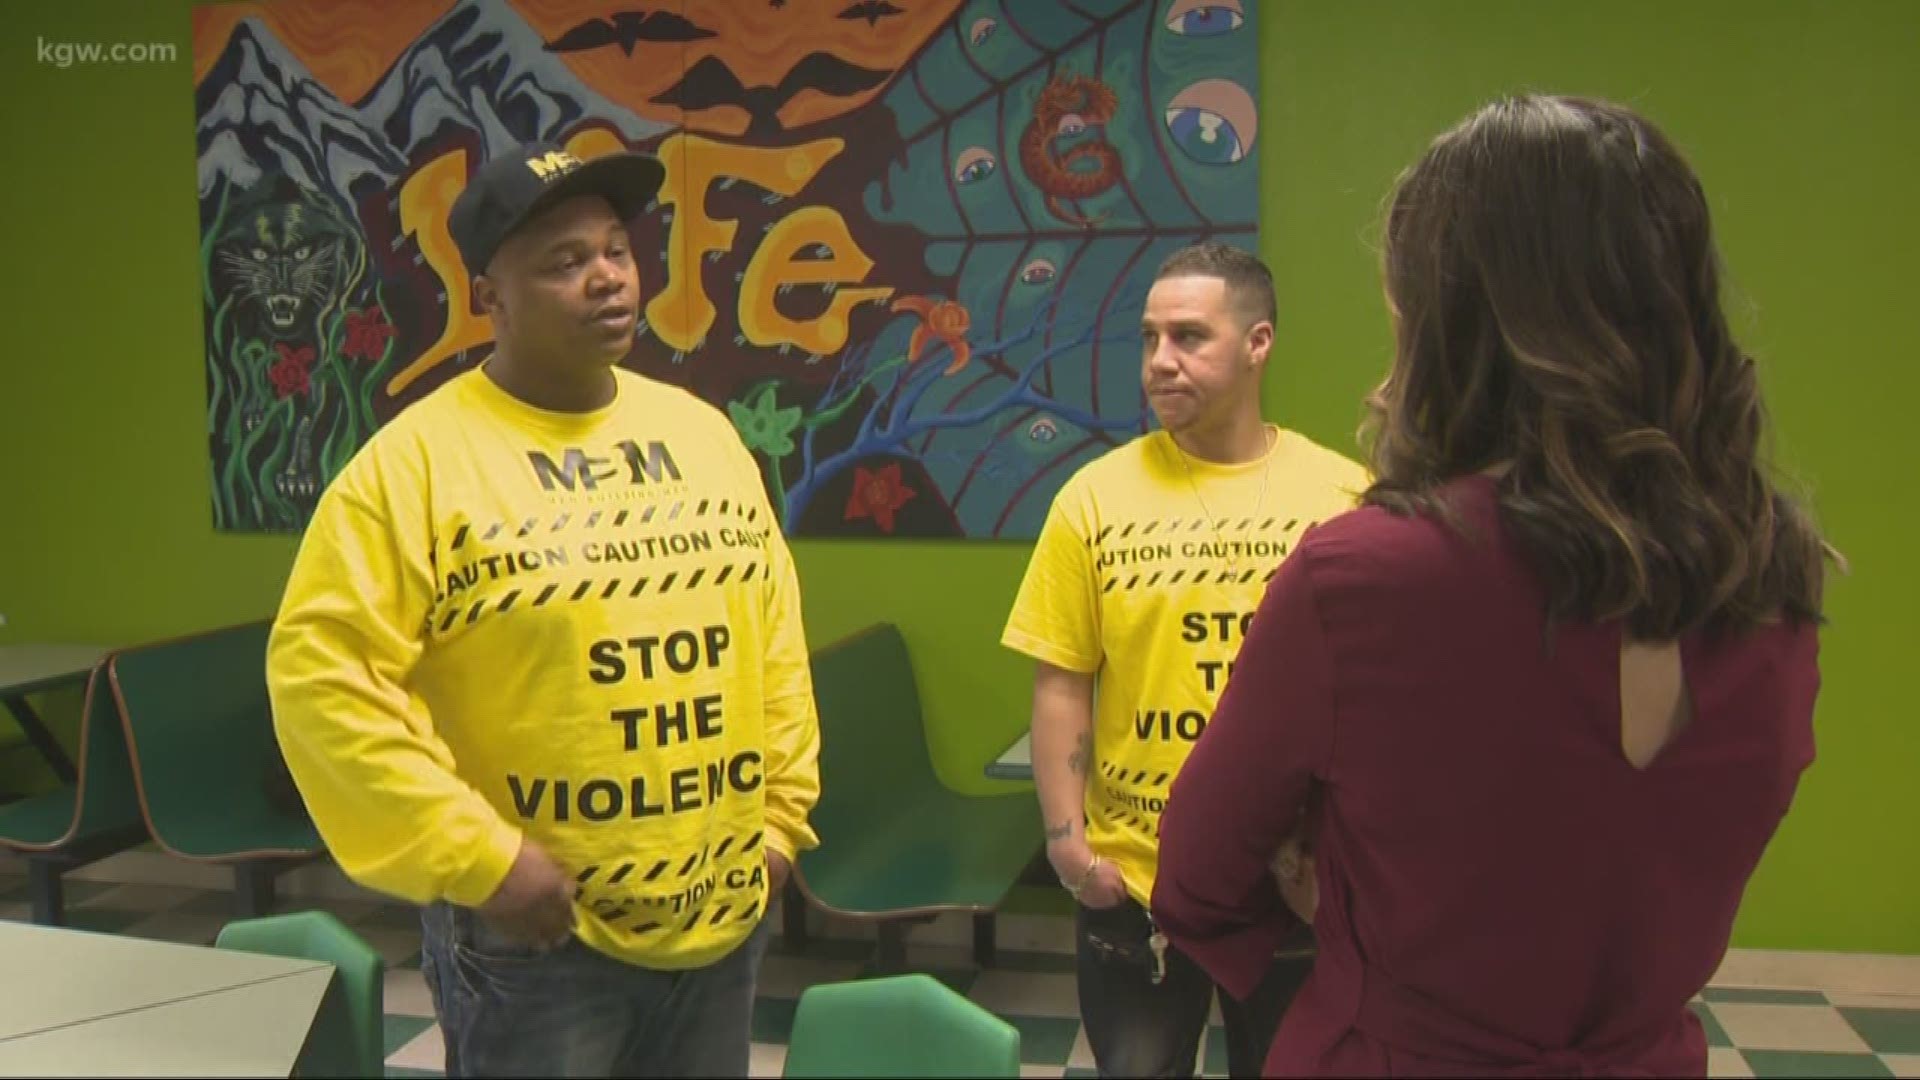 “We are the Caution” is a Portland effort to stop gun violence. Morgan Romero reports on the anti-violence campaign